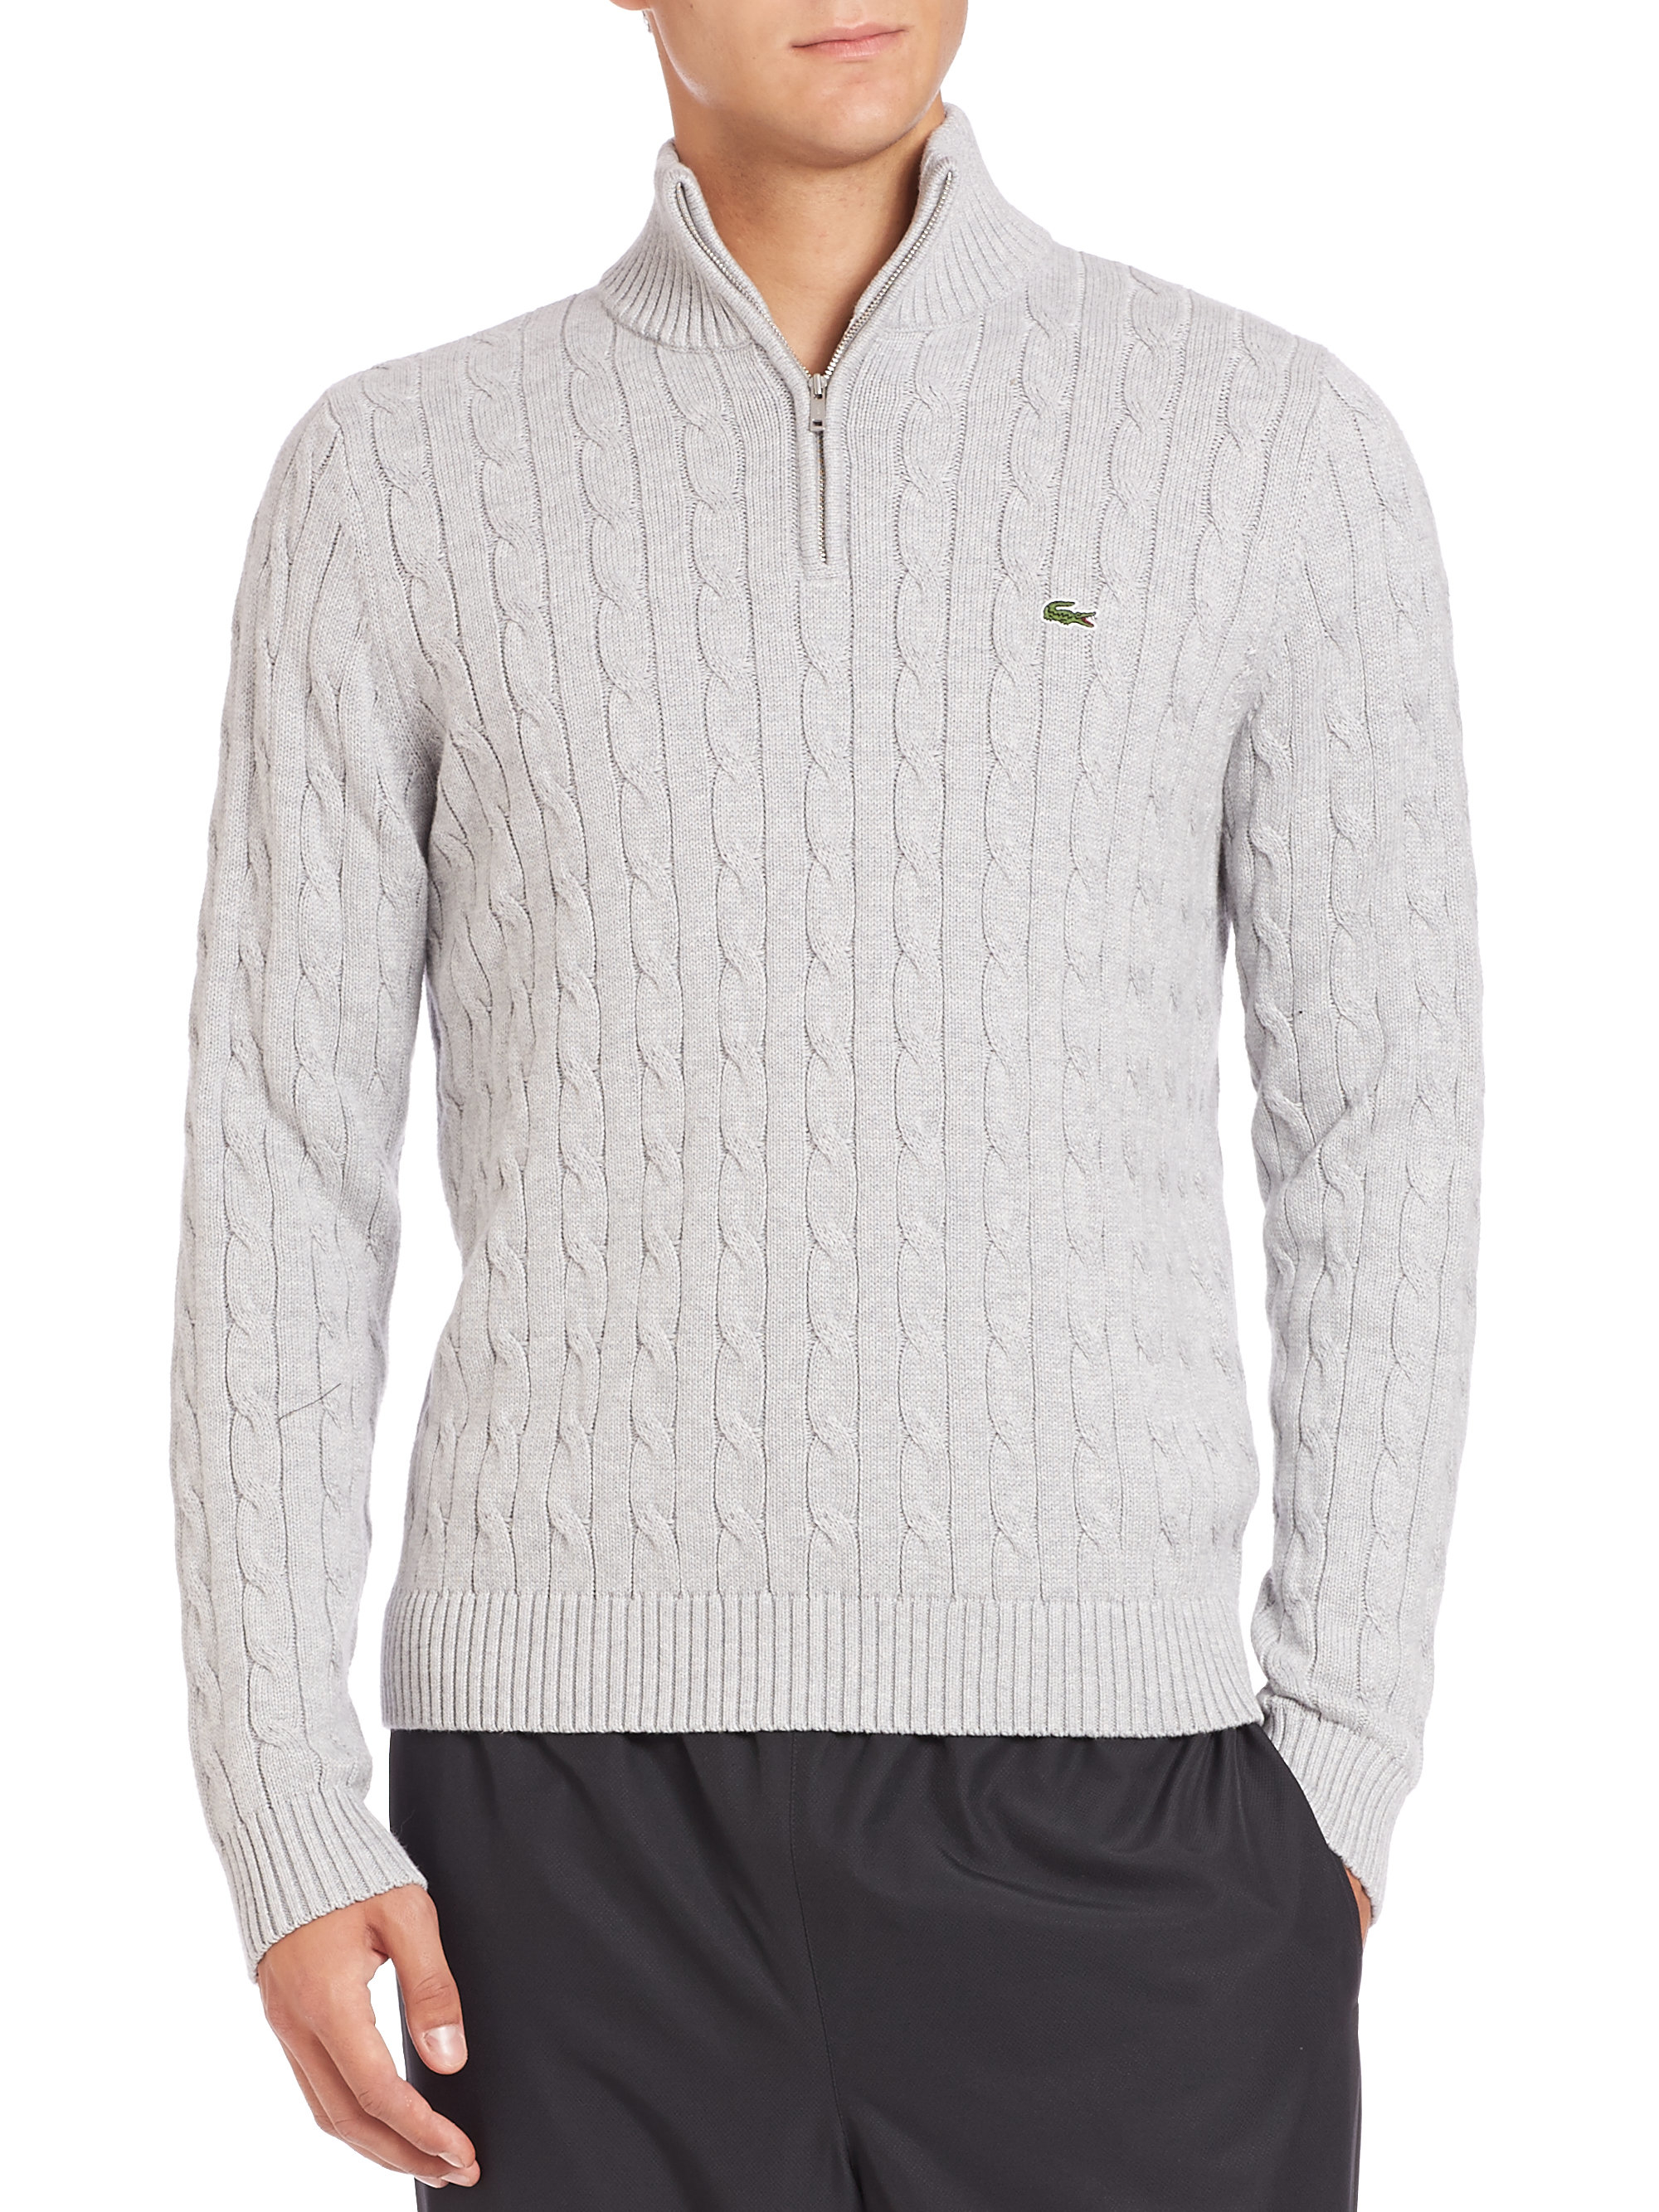 Lyst Lacoste Cotton Cable Knit Sweater In Gray For Men